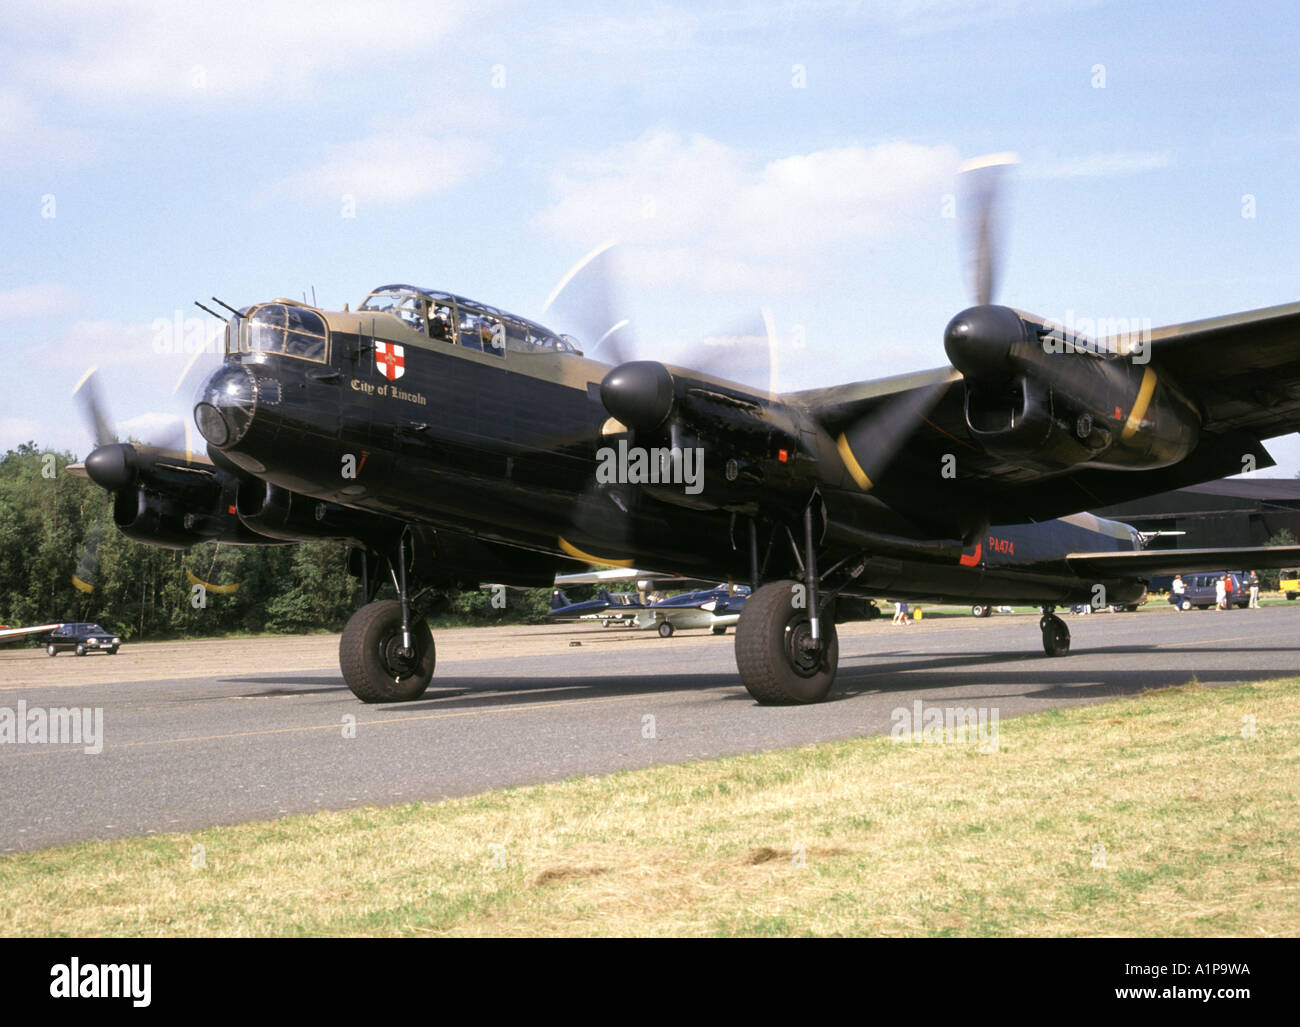 Wartime preserved Avro Lancaster bomber City of Lincoln of the Battle of Britain Memorial Flight prepares to commence airshow flypast Kent England UK Stock Photo